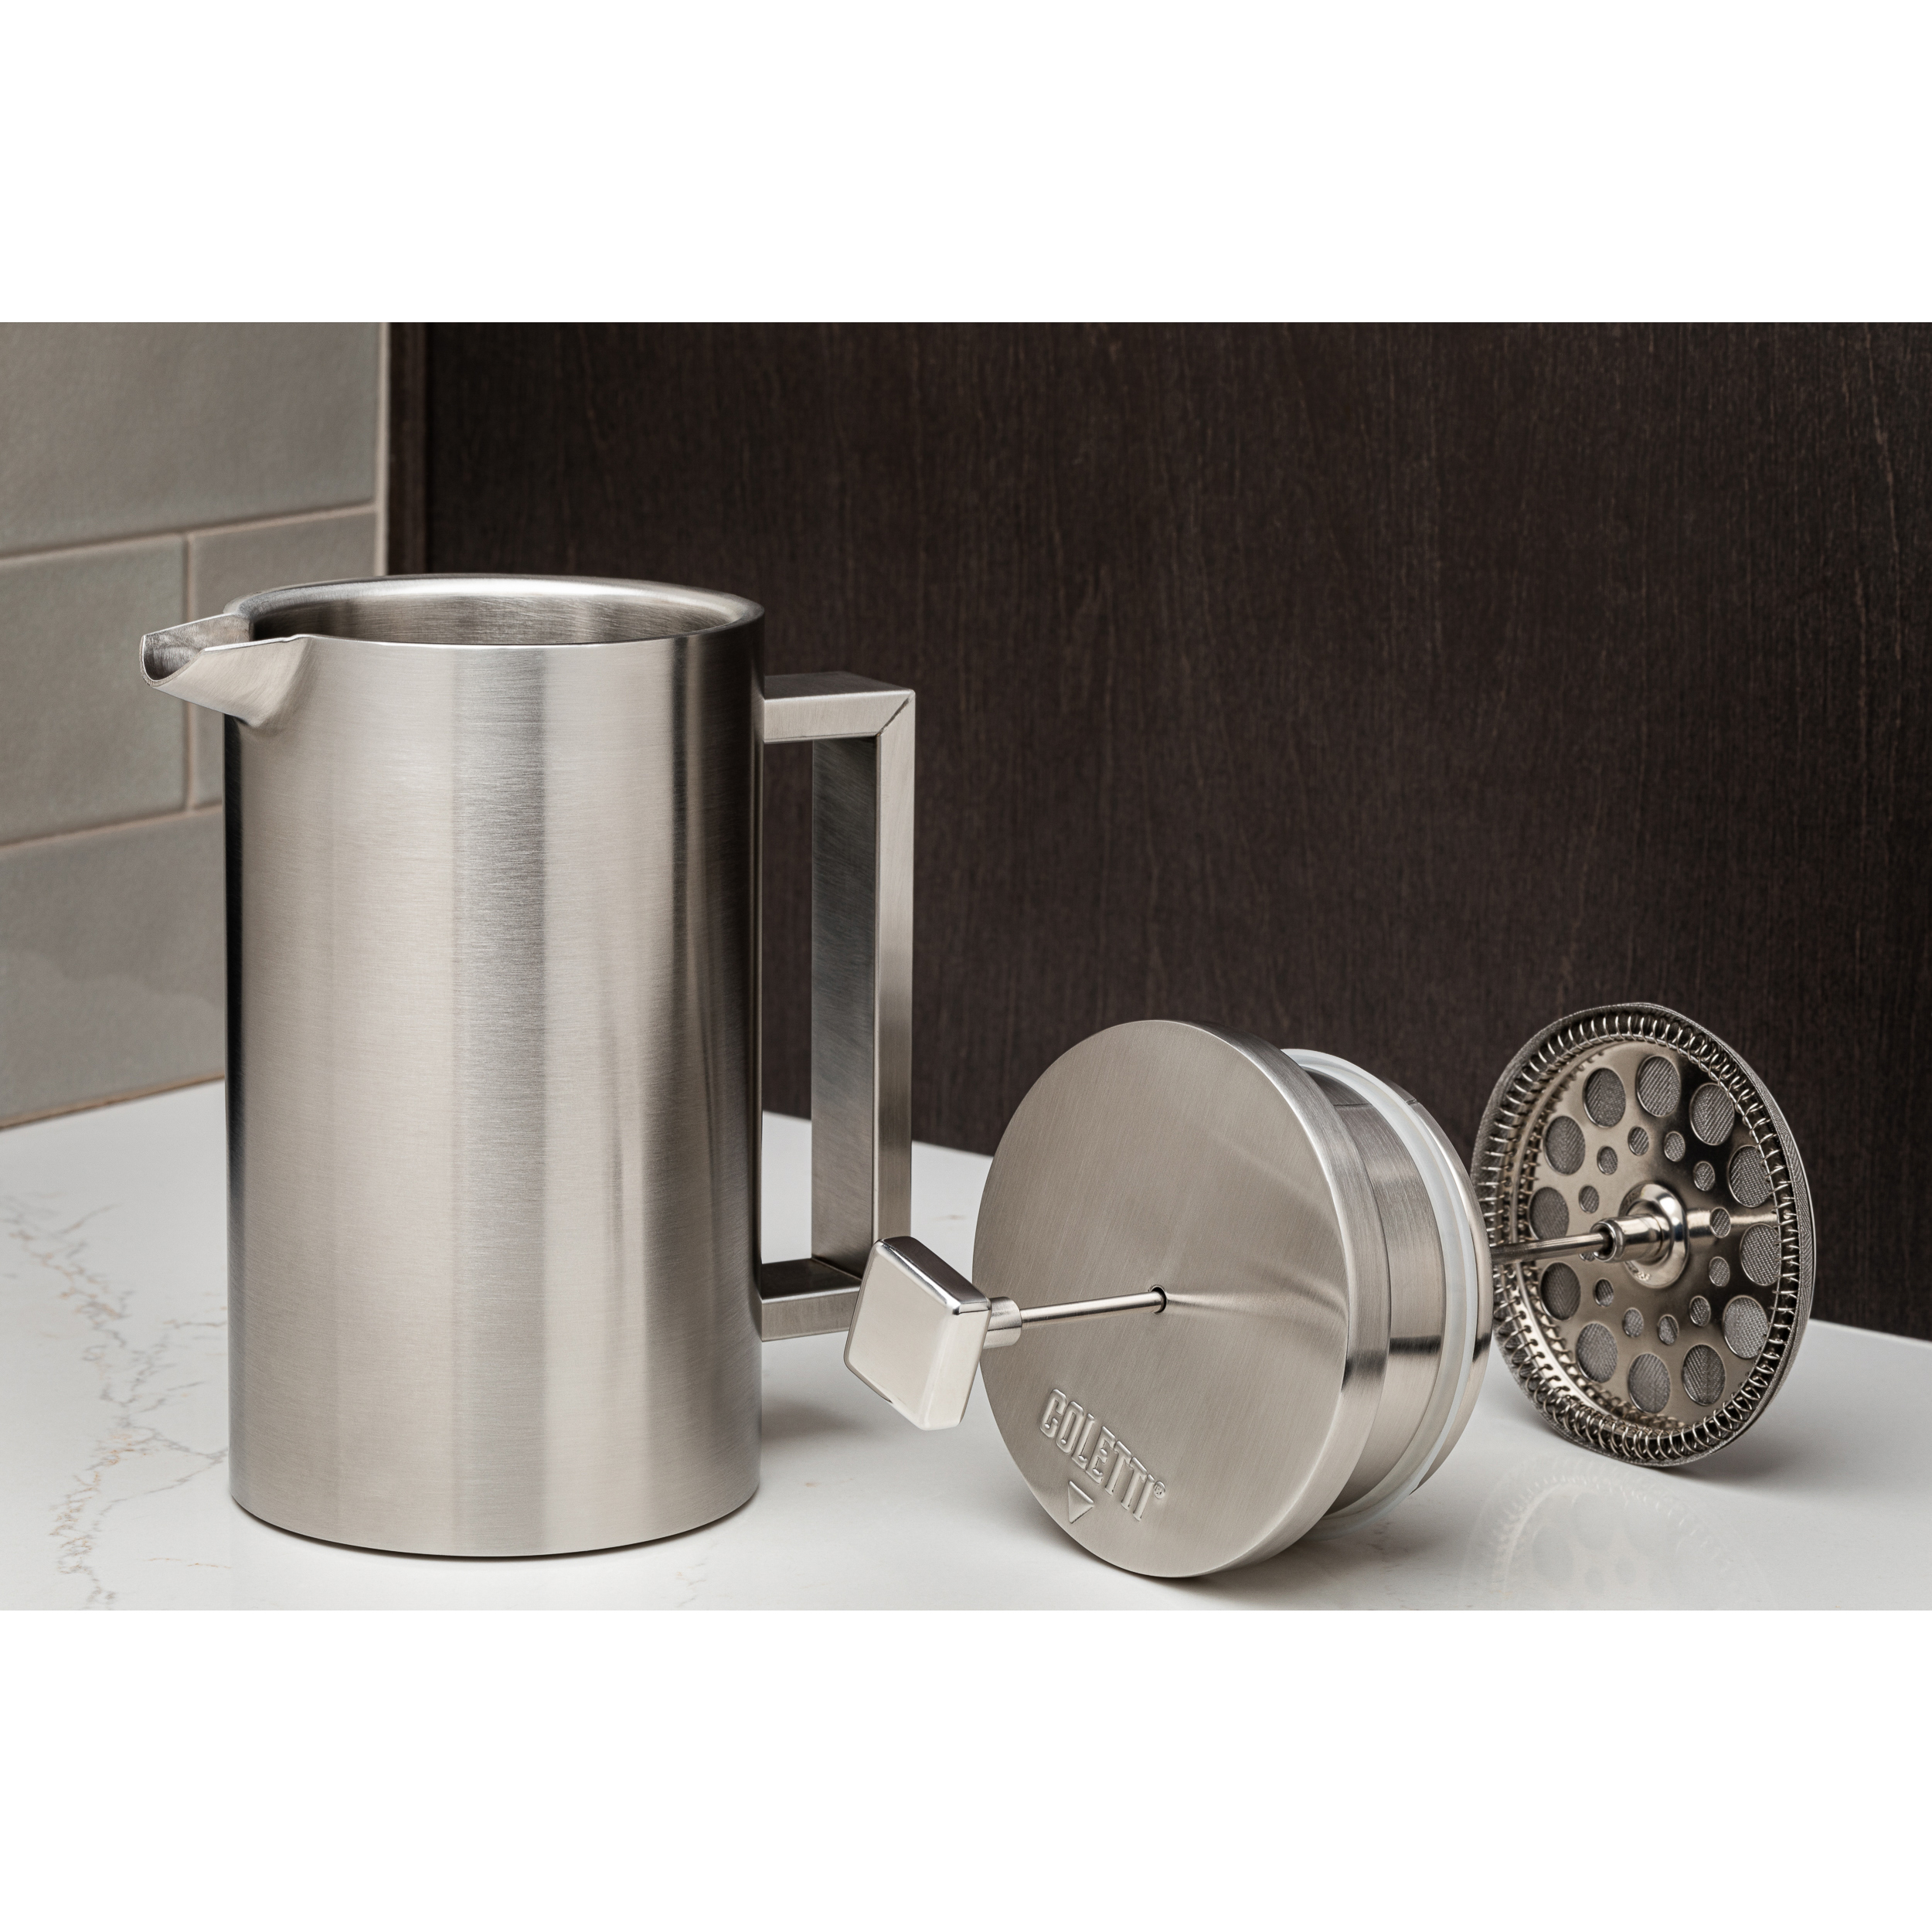 The COLETTI Boulder - 10 Cup Insulated French Press Coffee Maker